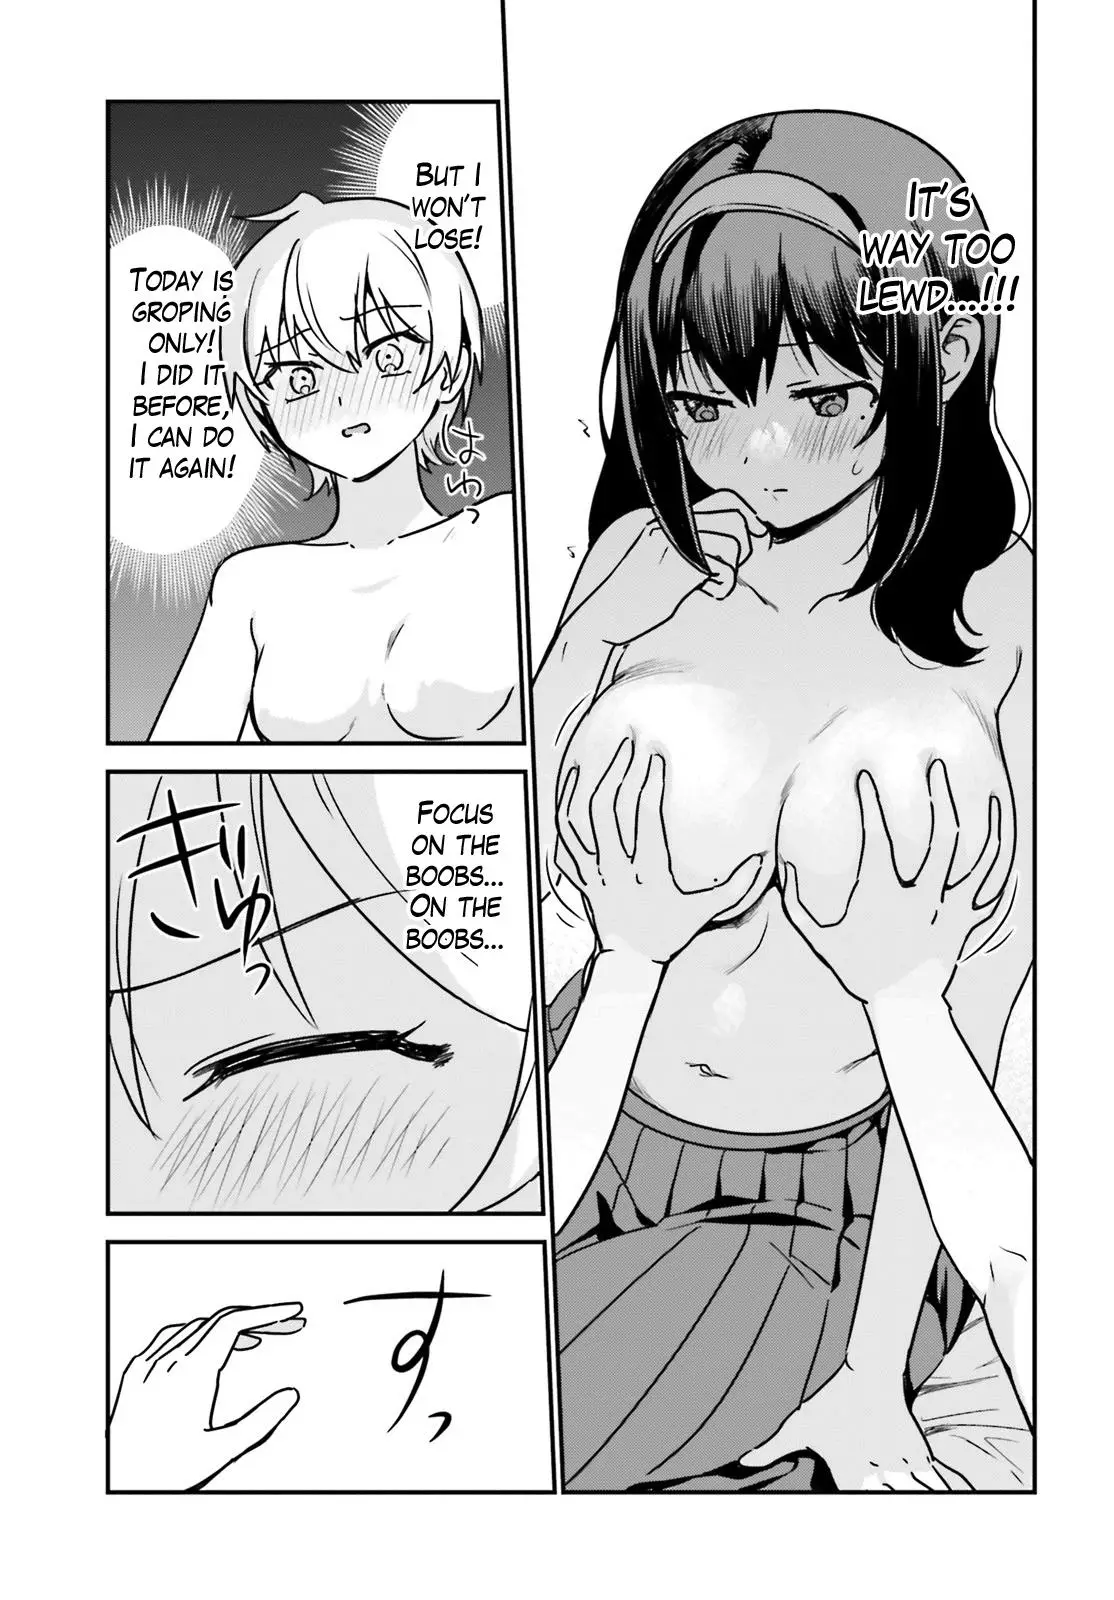 I Like Oppai Best In The World! - 69 page 9-25596cbb